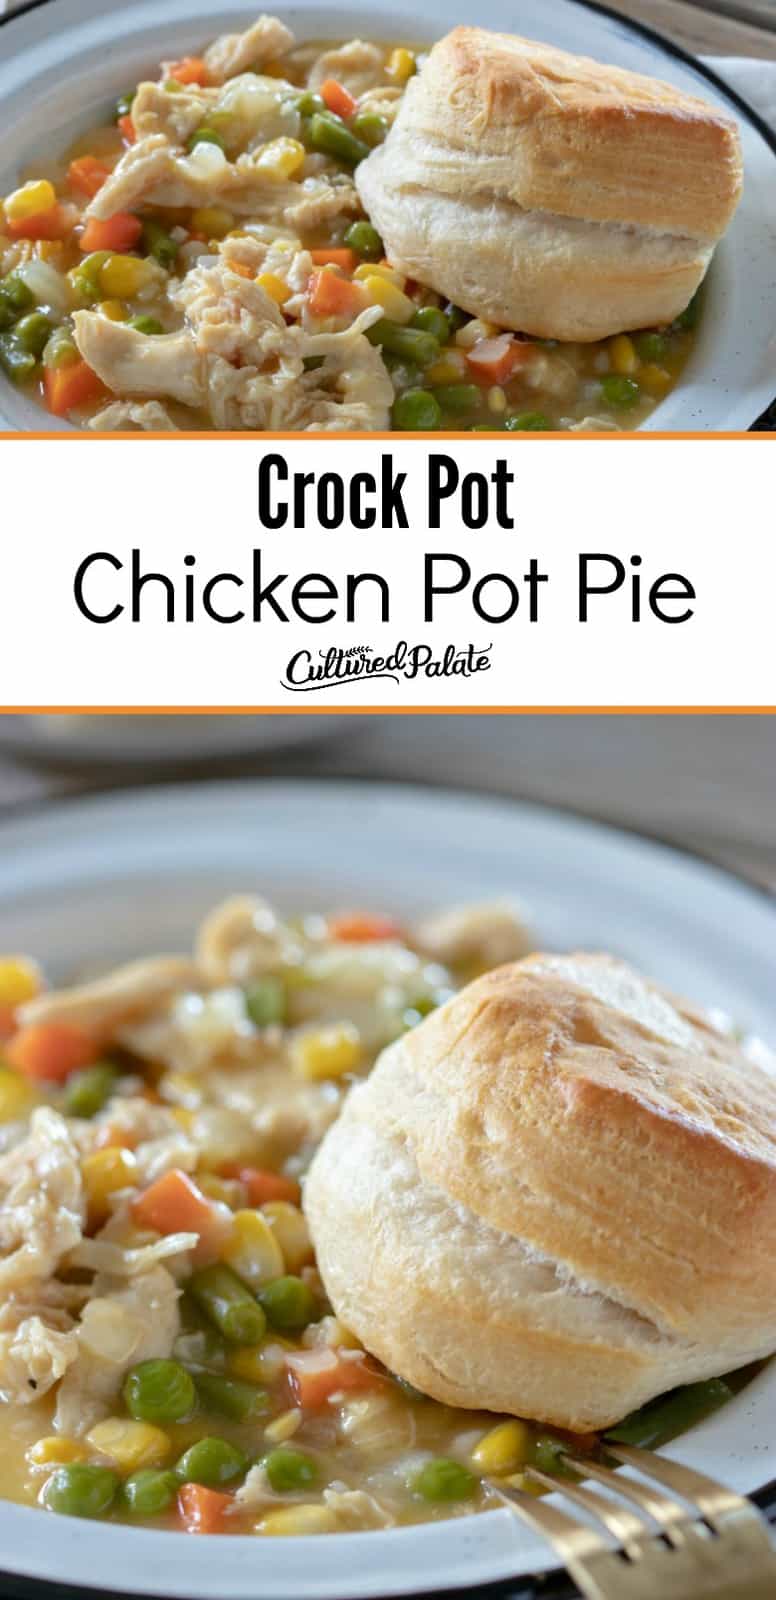 Crock Pot Chicken Pot Pie shown close up and far away with text overlay.